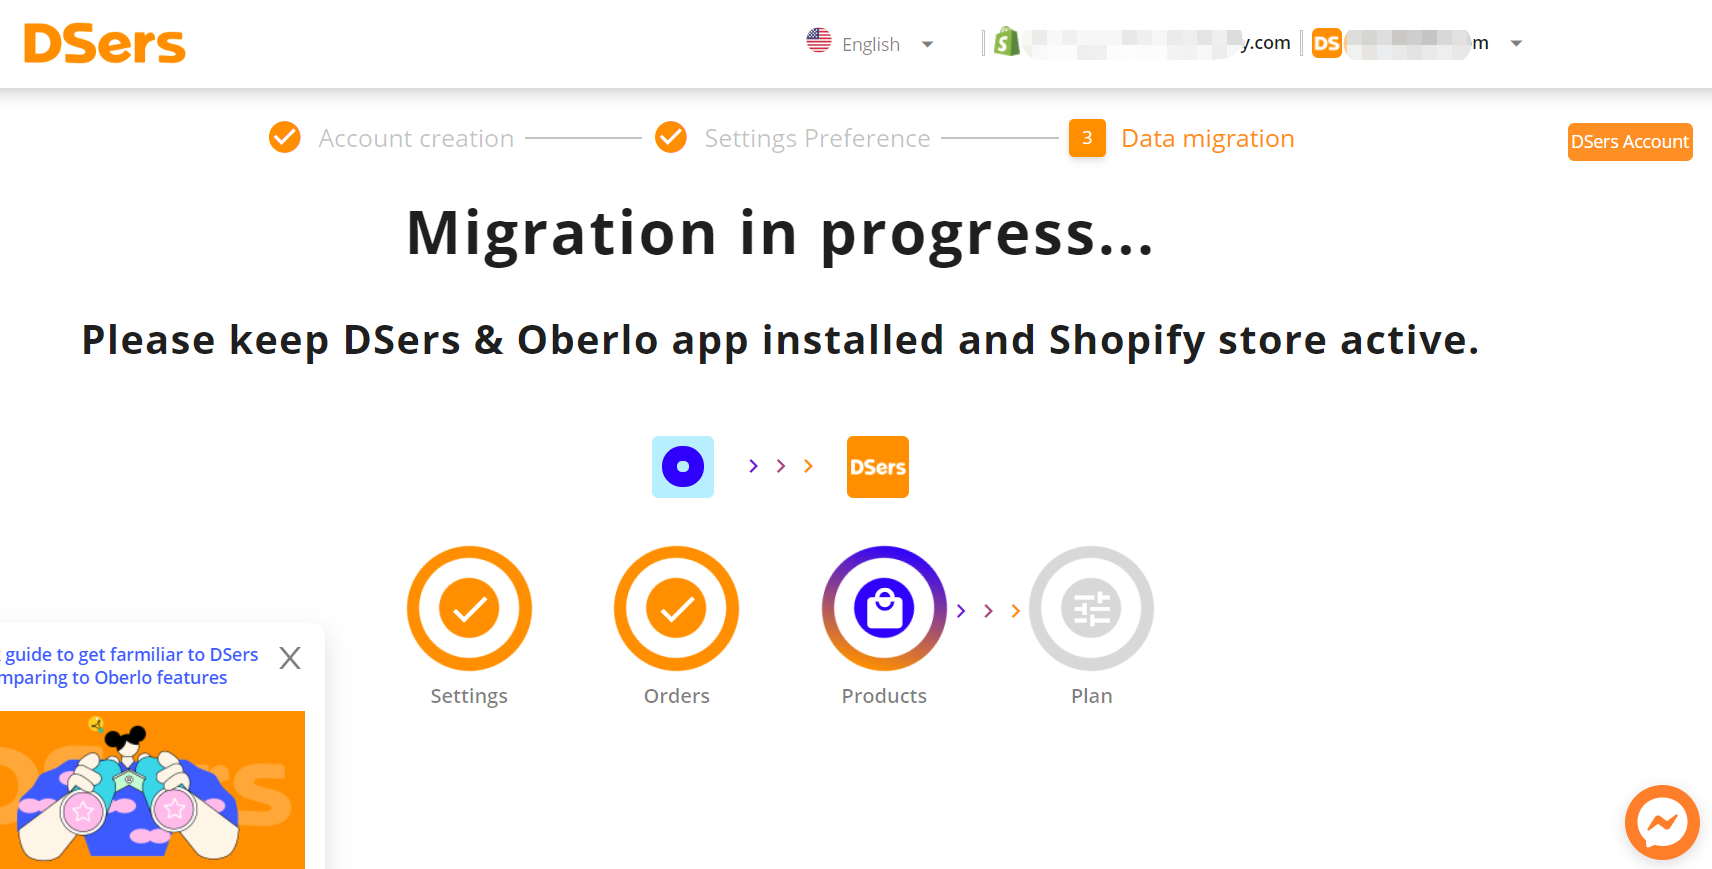 3-Migration in process-the migration of products